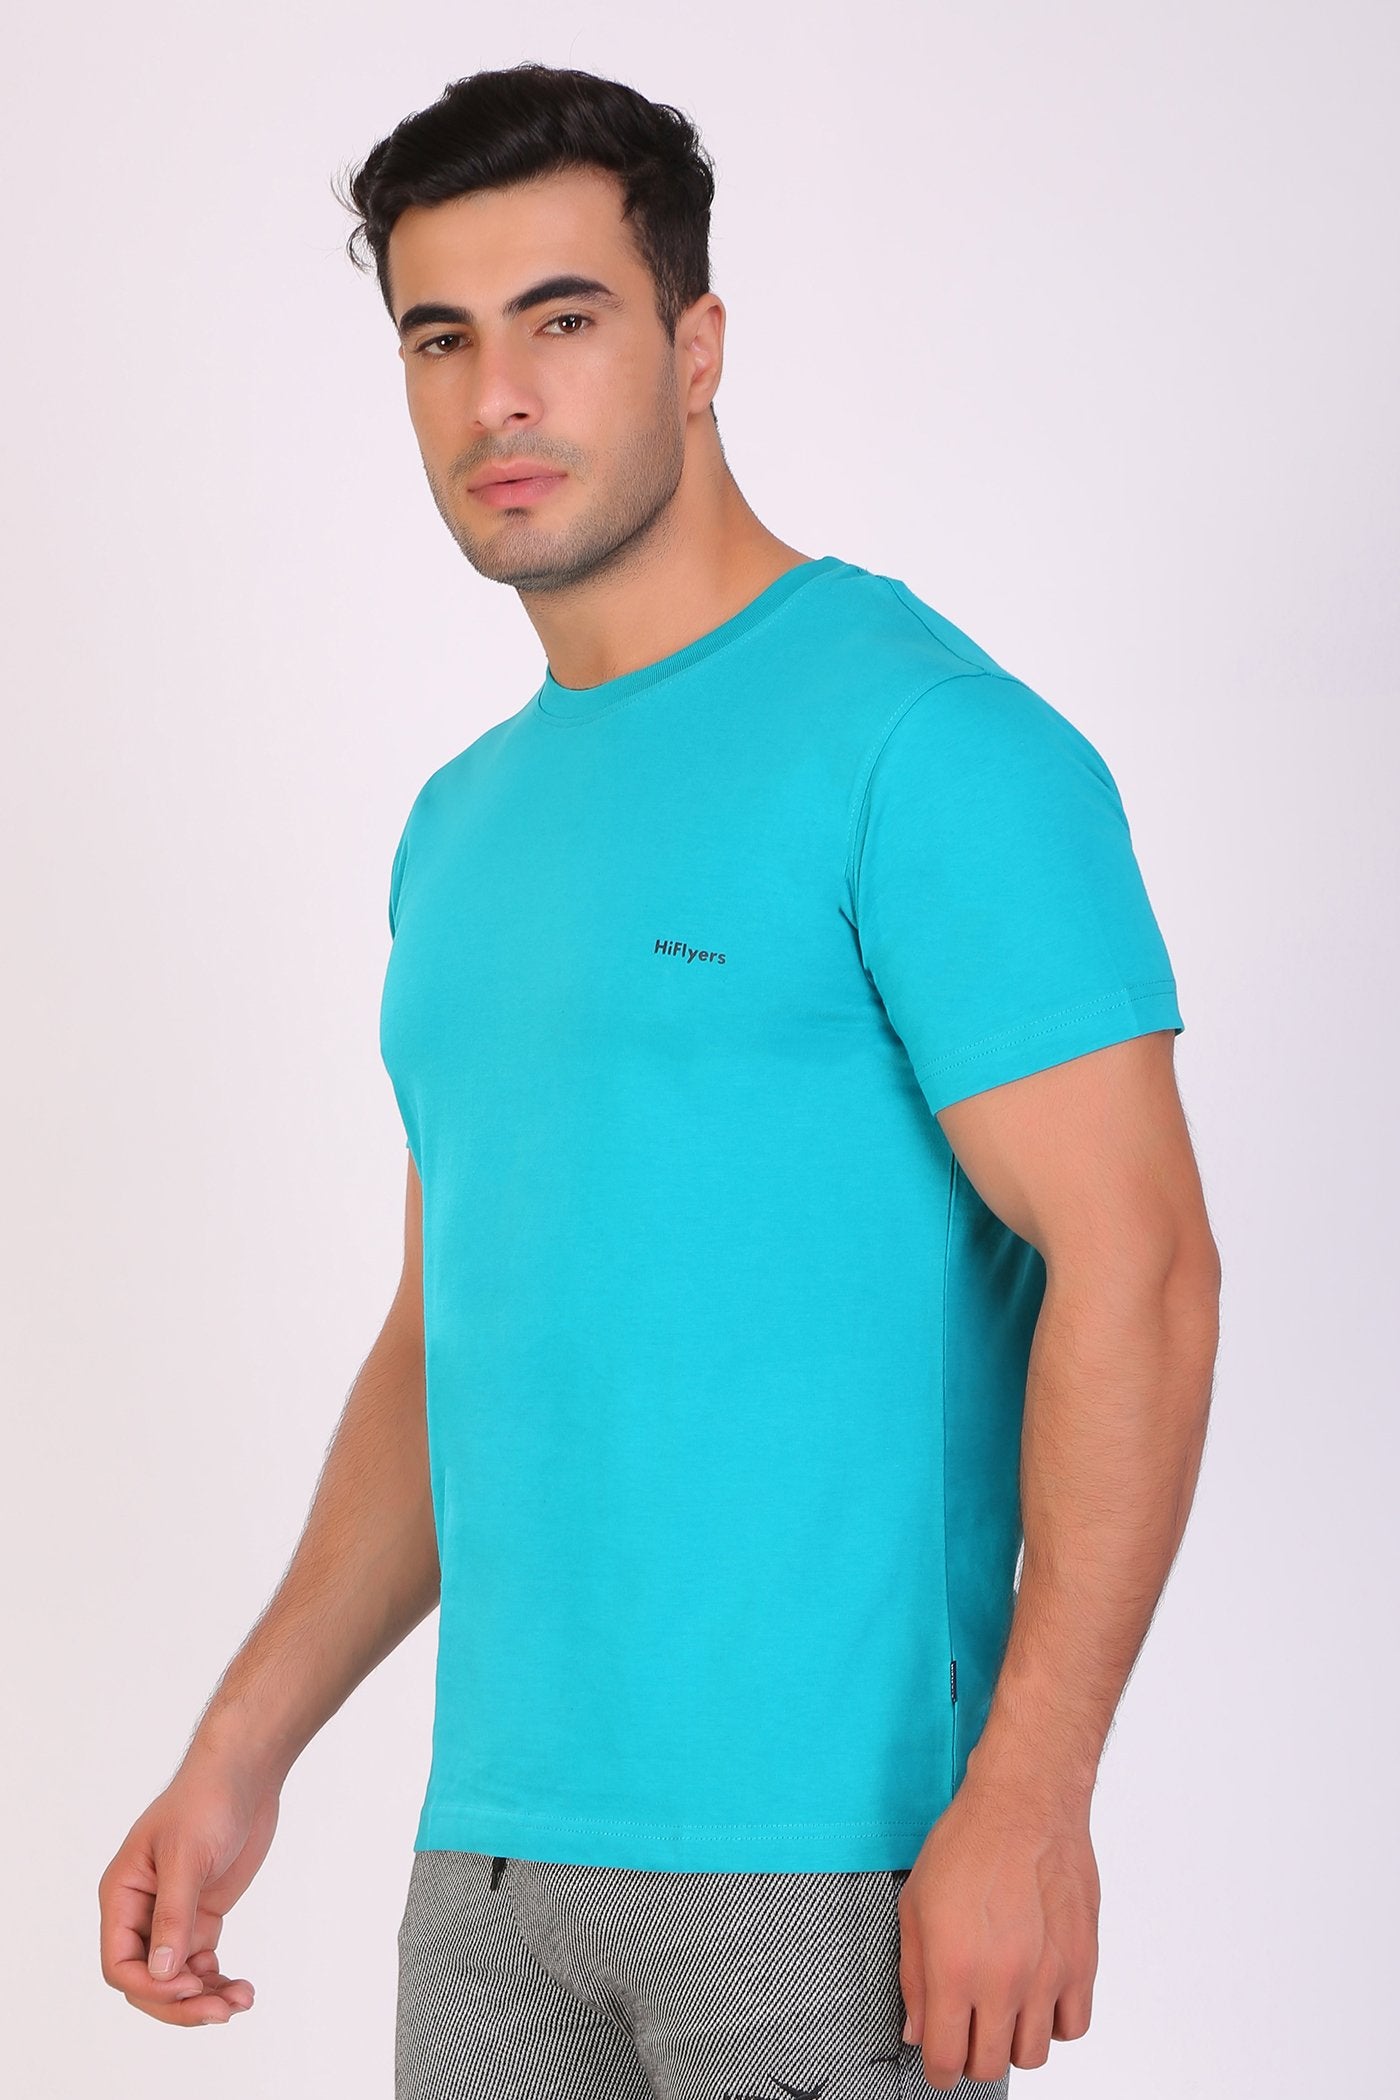 Hiflyers Men Slim Fit Solid Pack Of 3 Premium RN T-Shirt Teal Blue::Eden Green::Ted